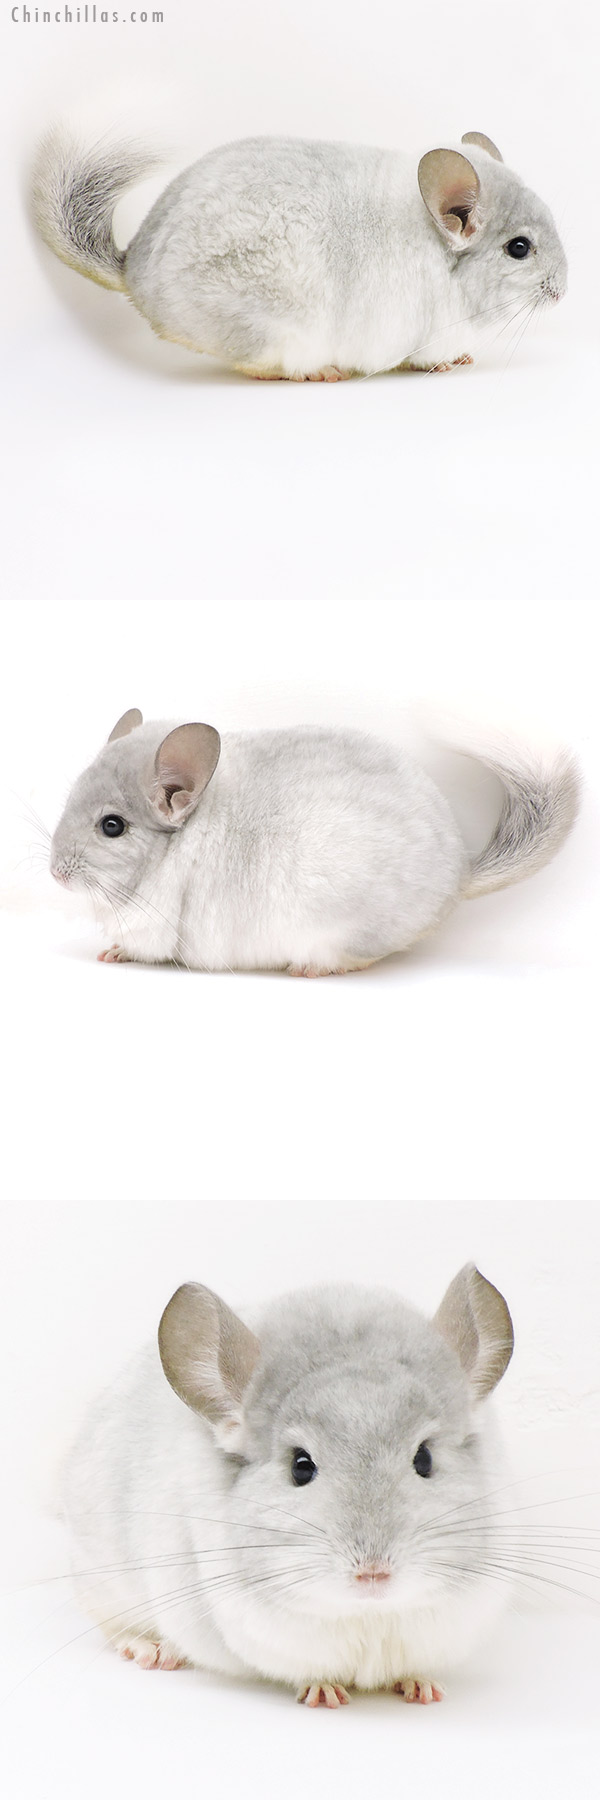 Chinchilla or related item offered for sale or export on Chinchillas.com - 18110 Large Blocky Top Show Quality Violet & White Mosaic Male Chinchilla